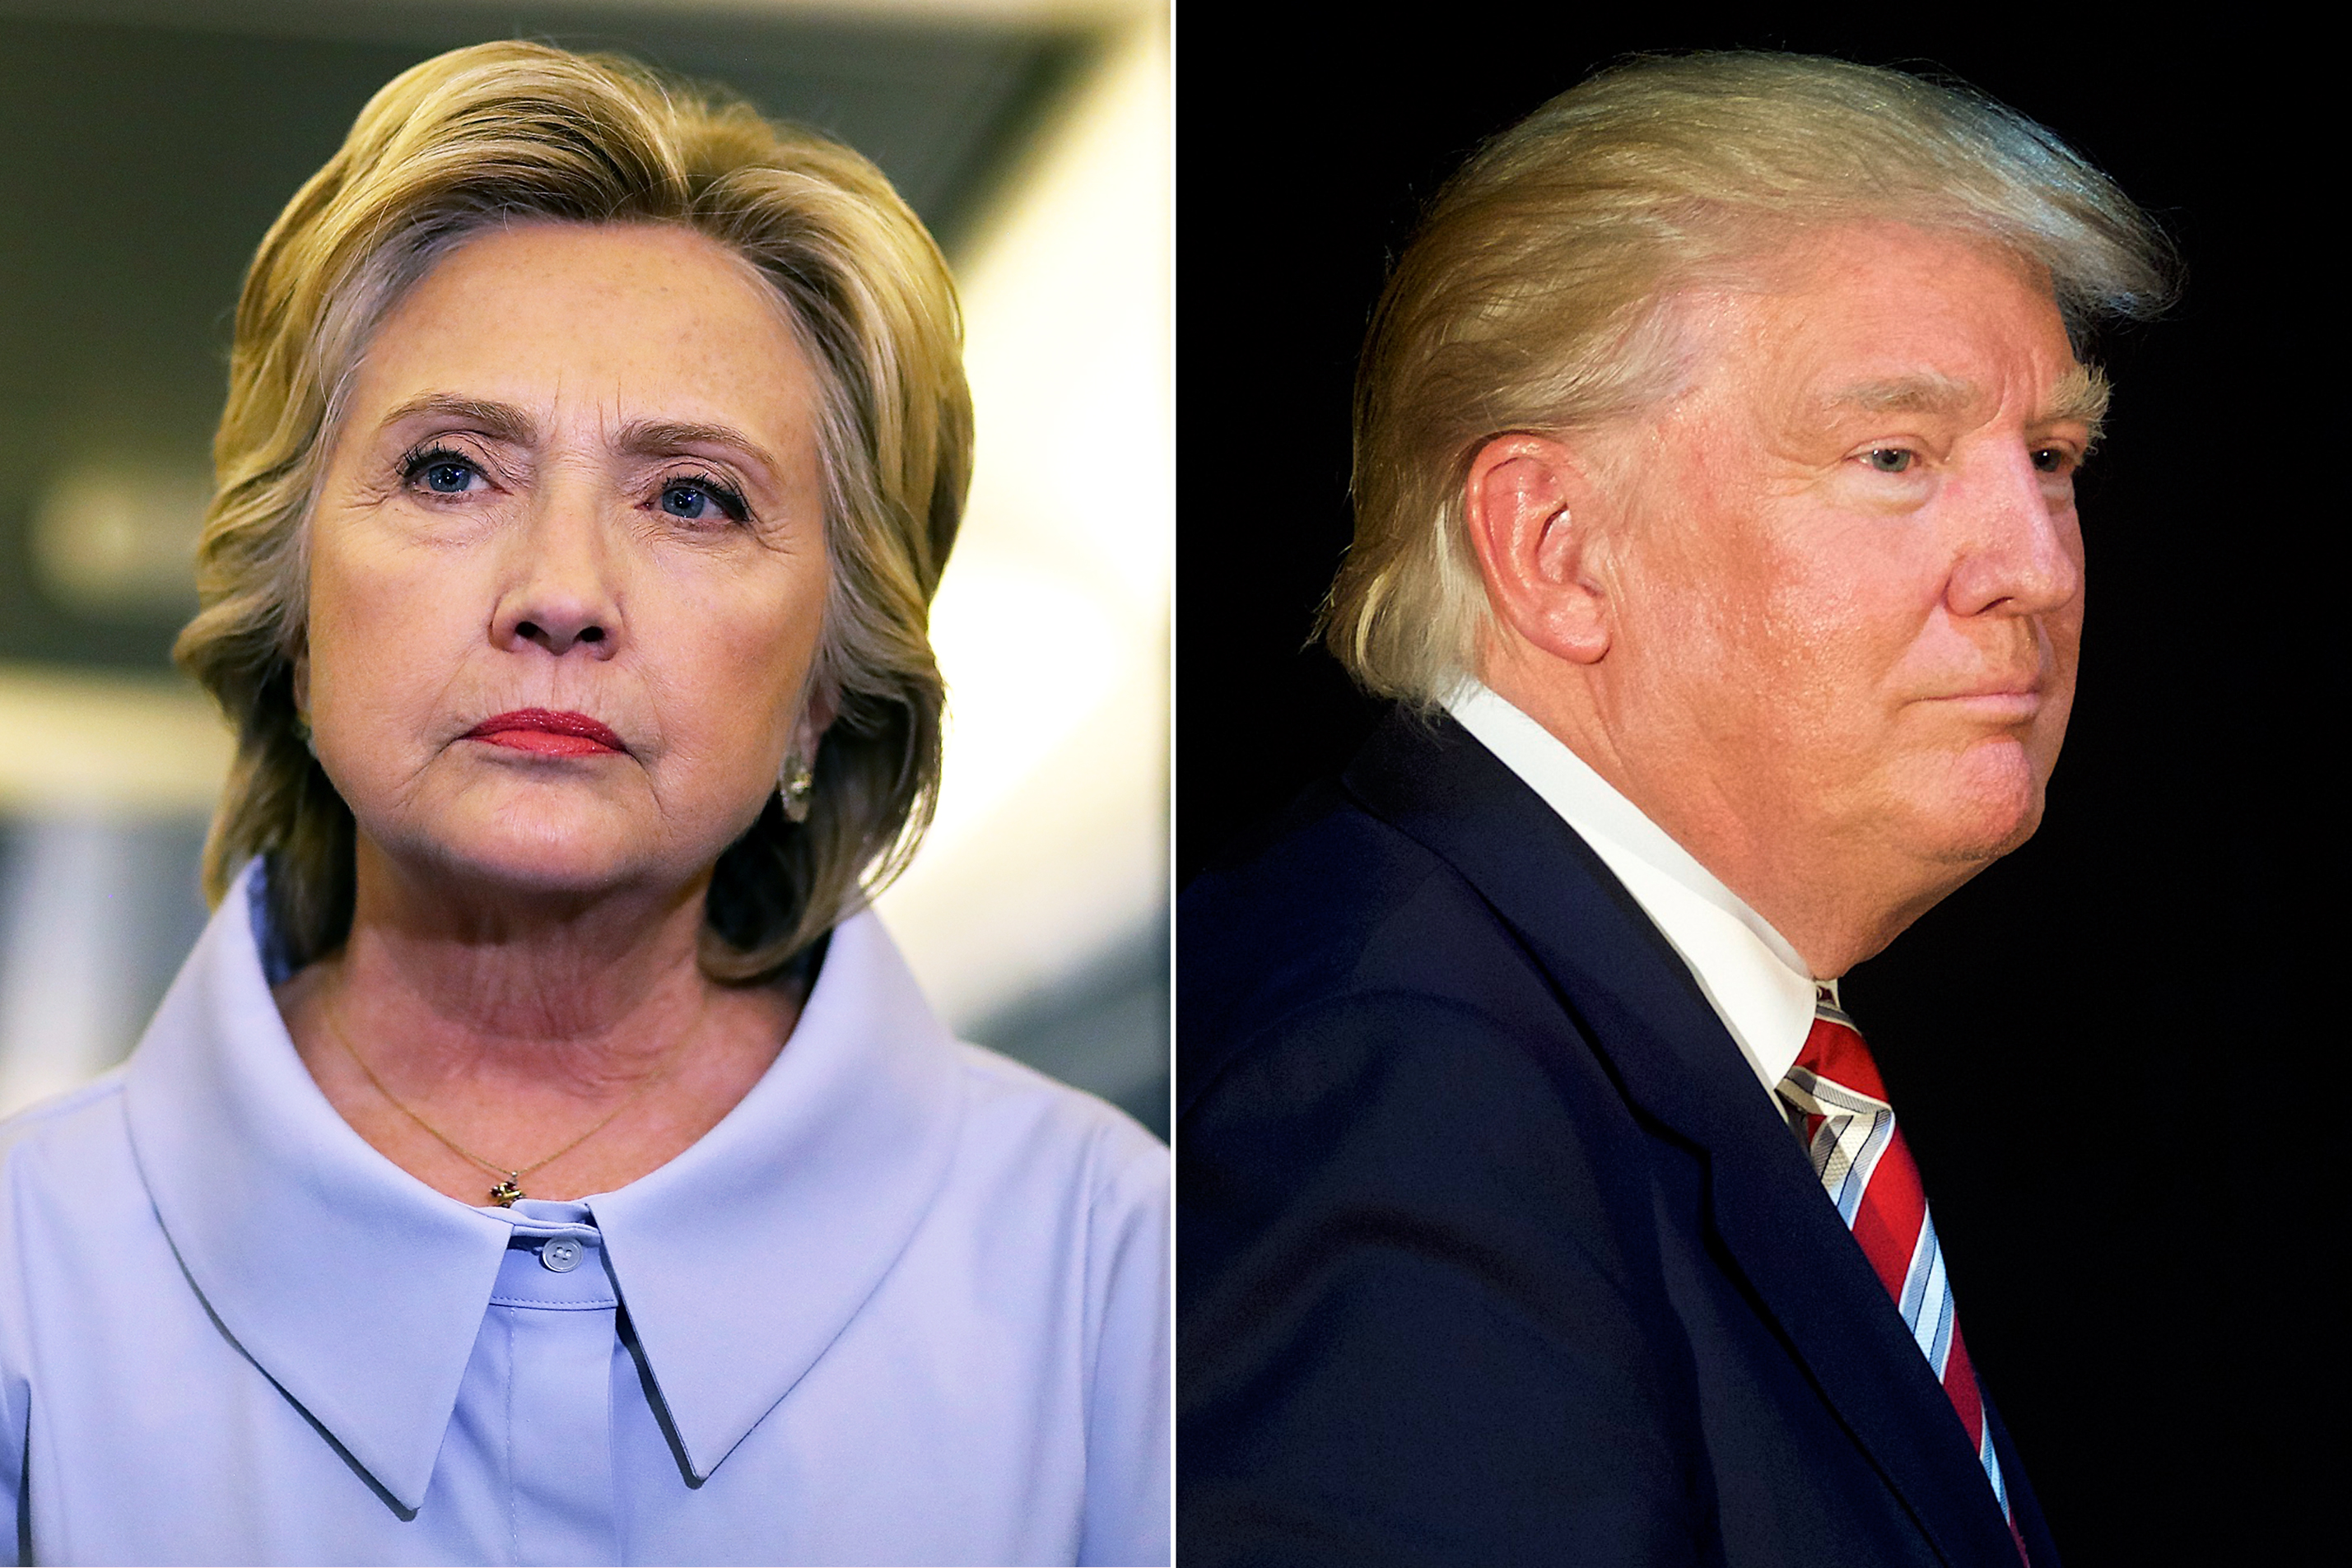 Hillary Clinton in Iowa. on Sept. 5, 2016 (L); Donald Trump in Aston, PA, on Sept. 13, 2016. (Justin Sullivan—Getty Images (L); Mark Makela—Getty Images)